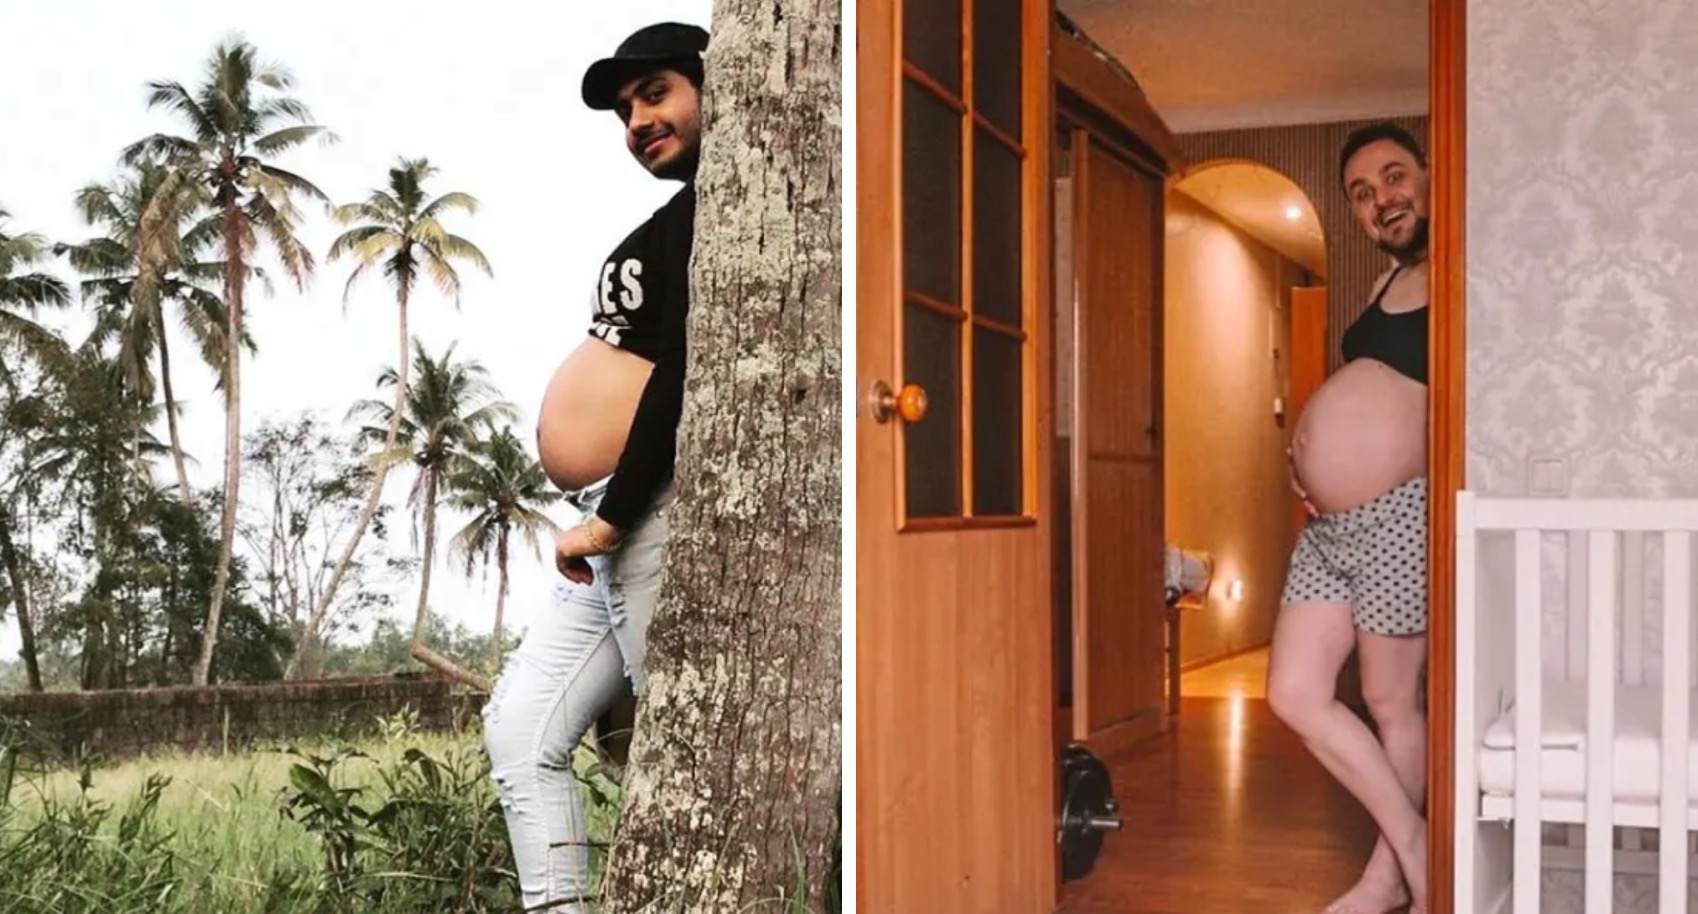 New Pregnancy Photo Trend Is Making People Do a Double-Take